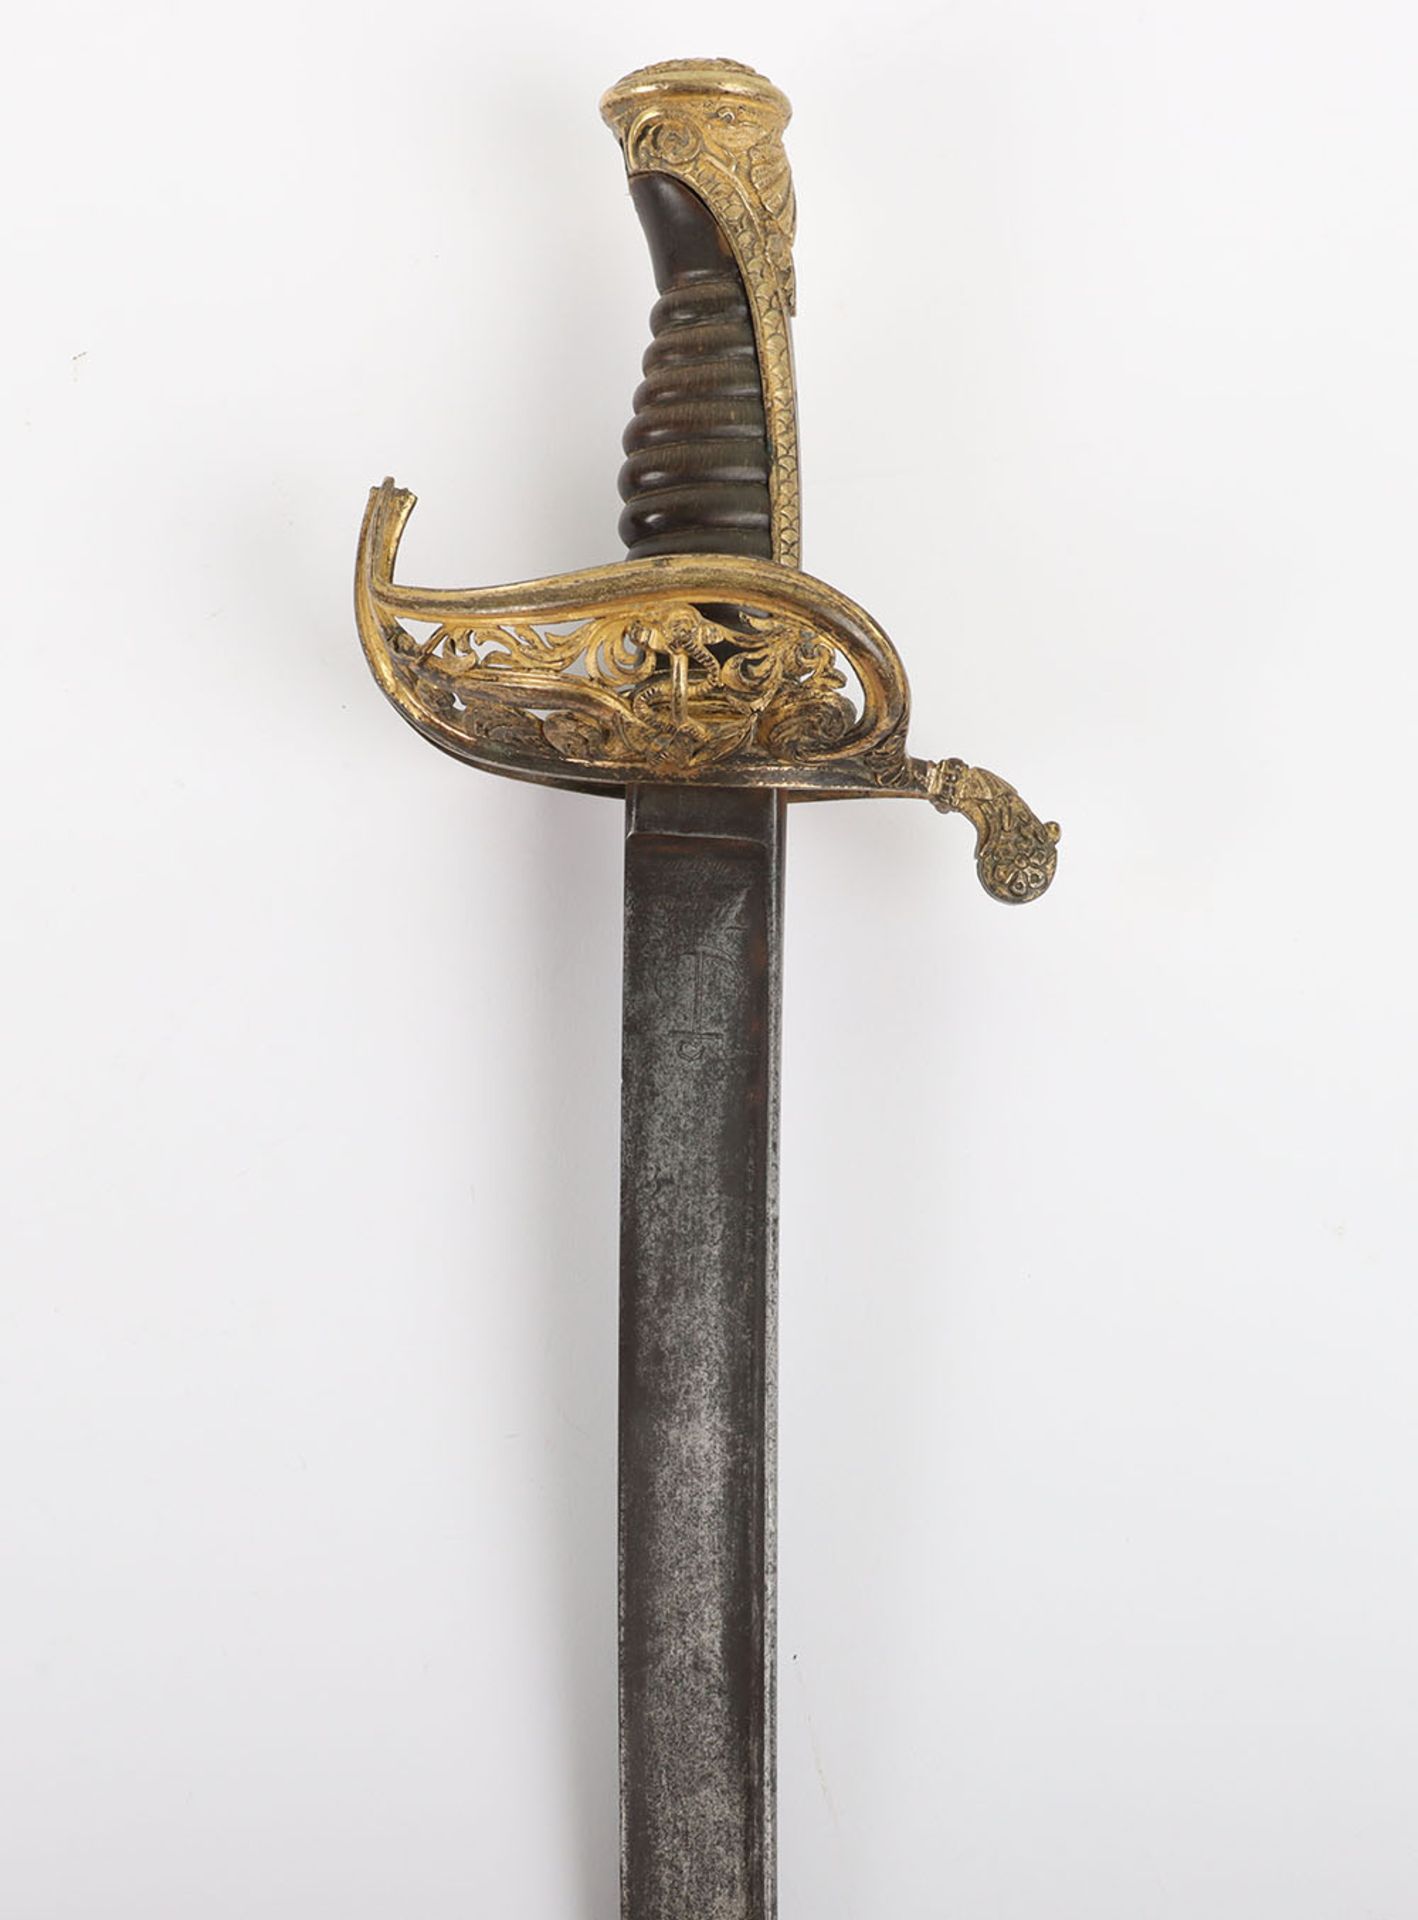 French Naval Officer’s Sword, c.1870